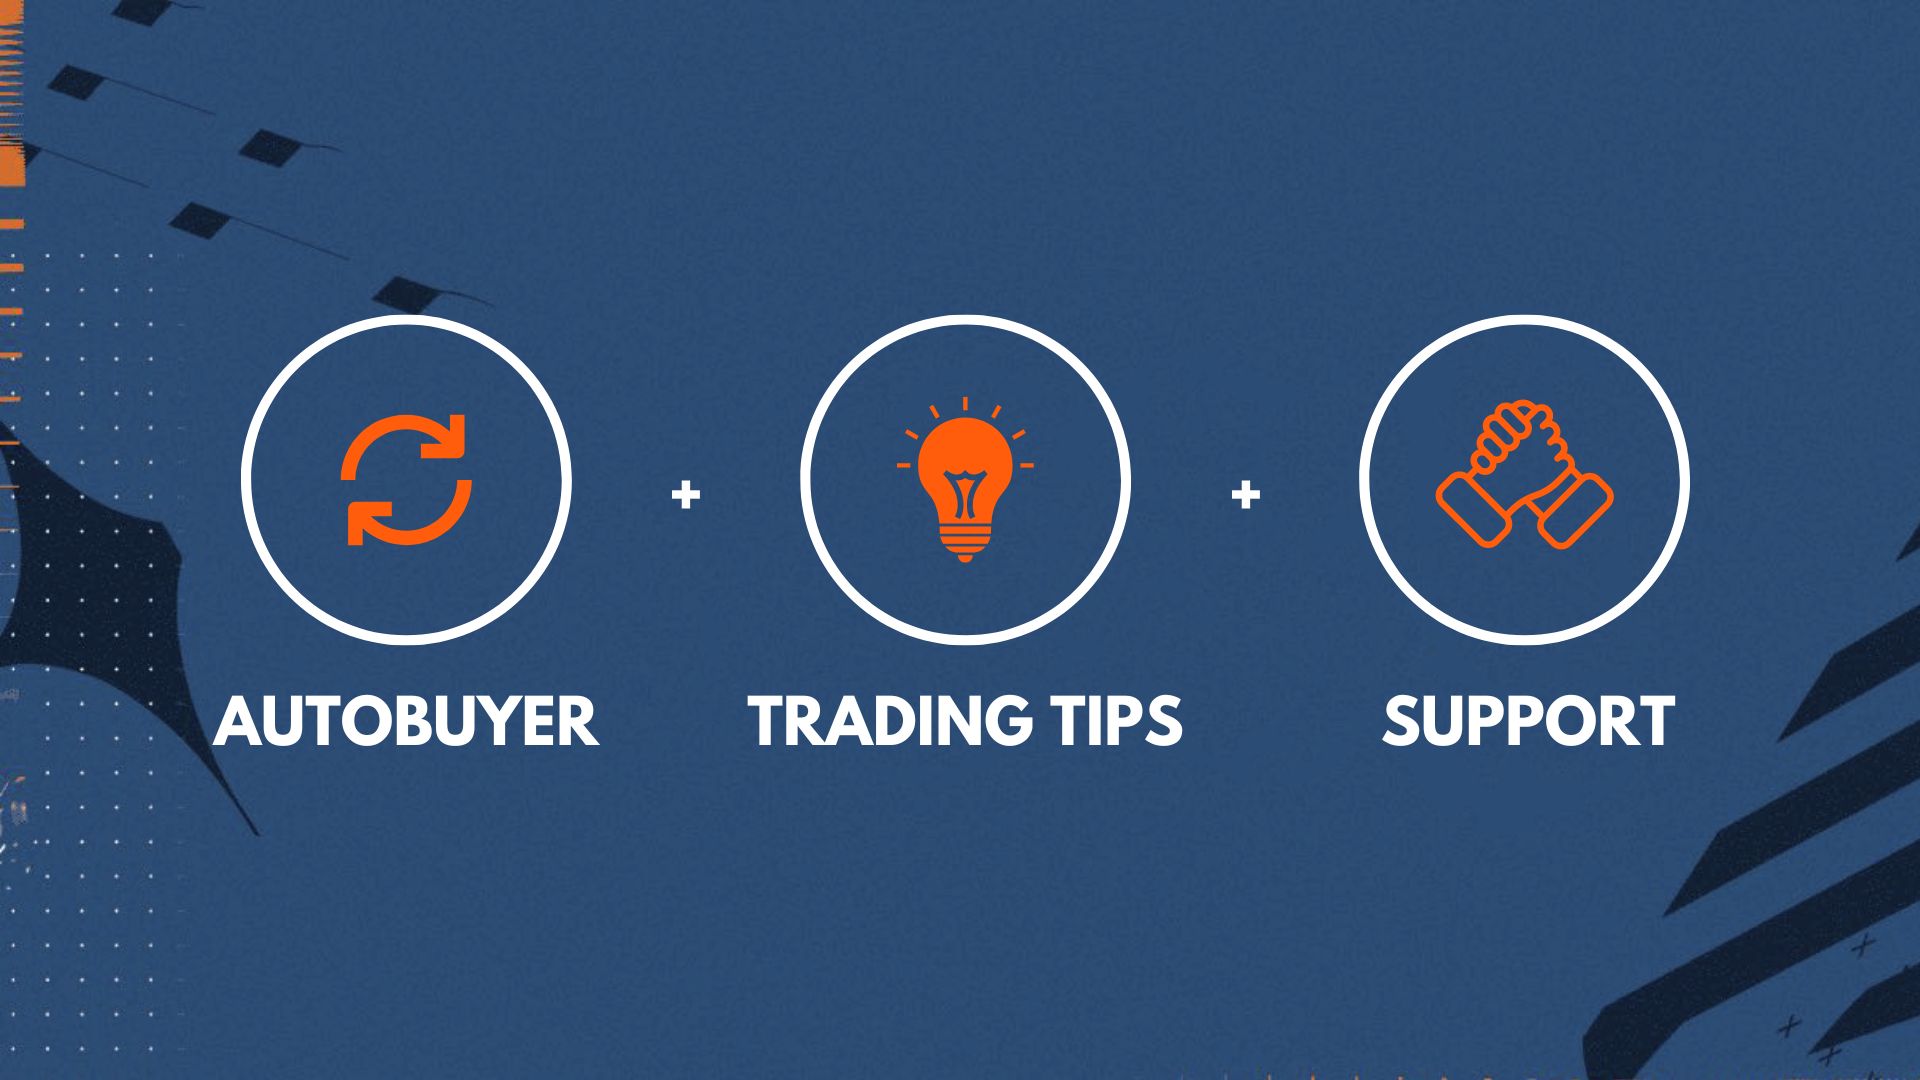 Everything you need to know about FIFA Autobuyer - FUT Simple Trader